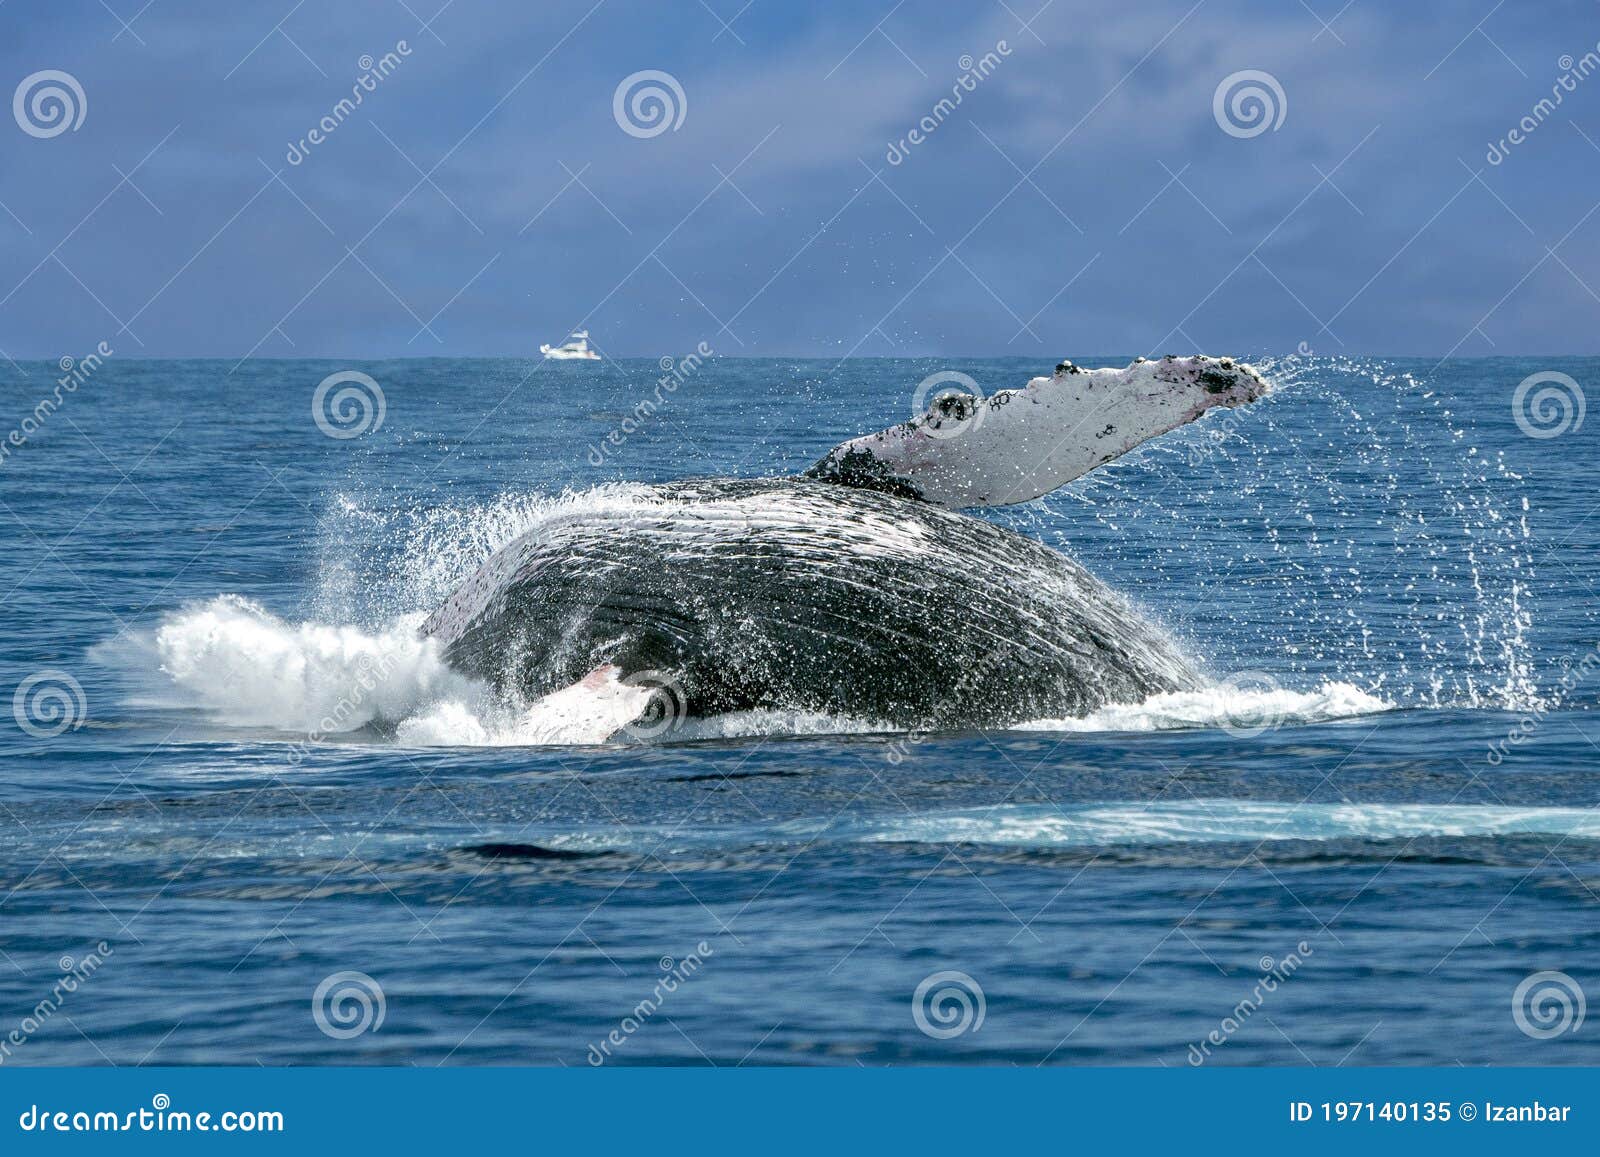 Humpback Whale Breaching in Cabo San Lucas Pacific Ocean Stock ...